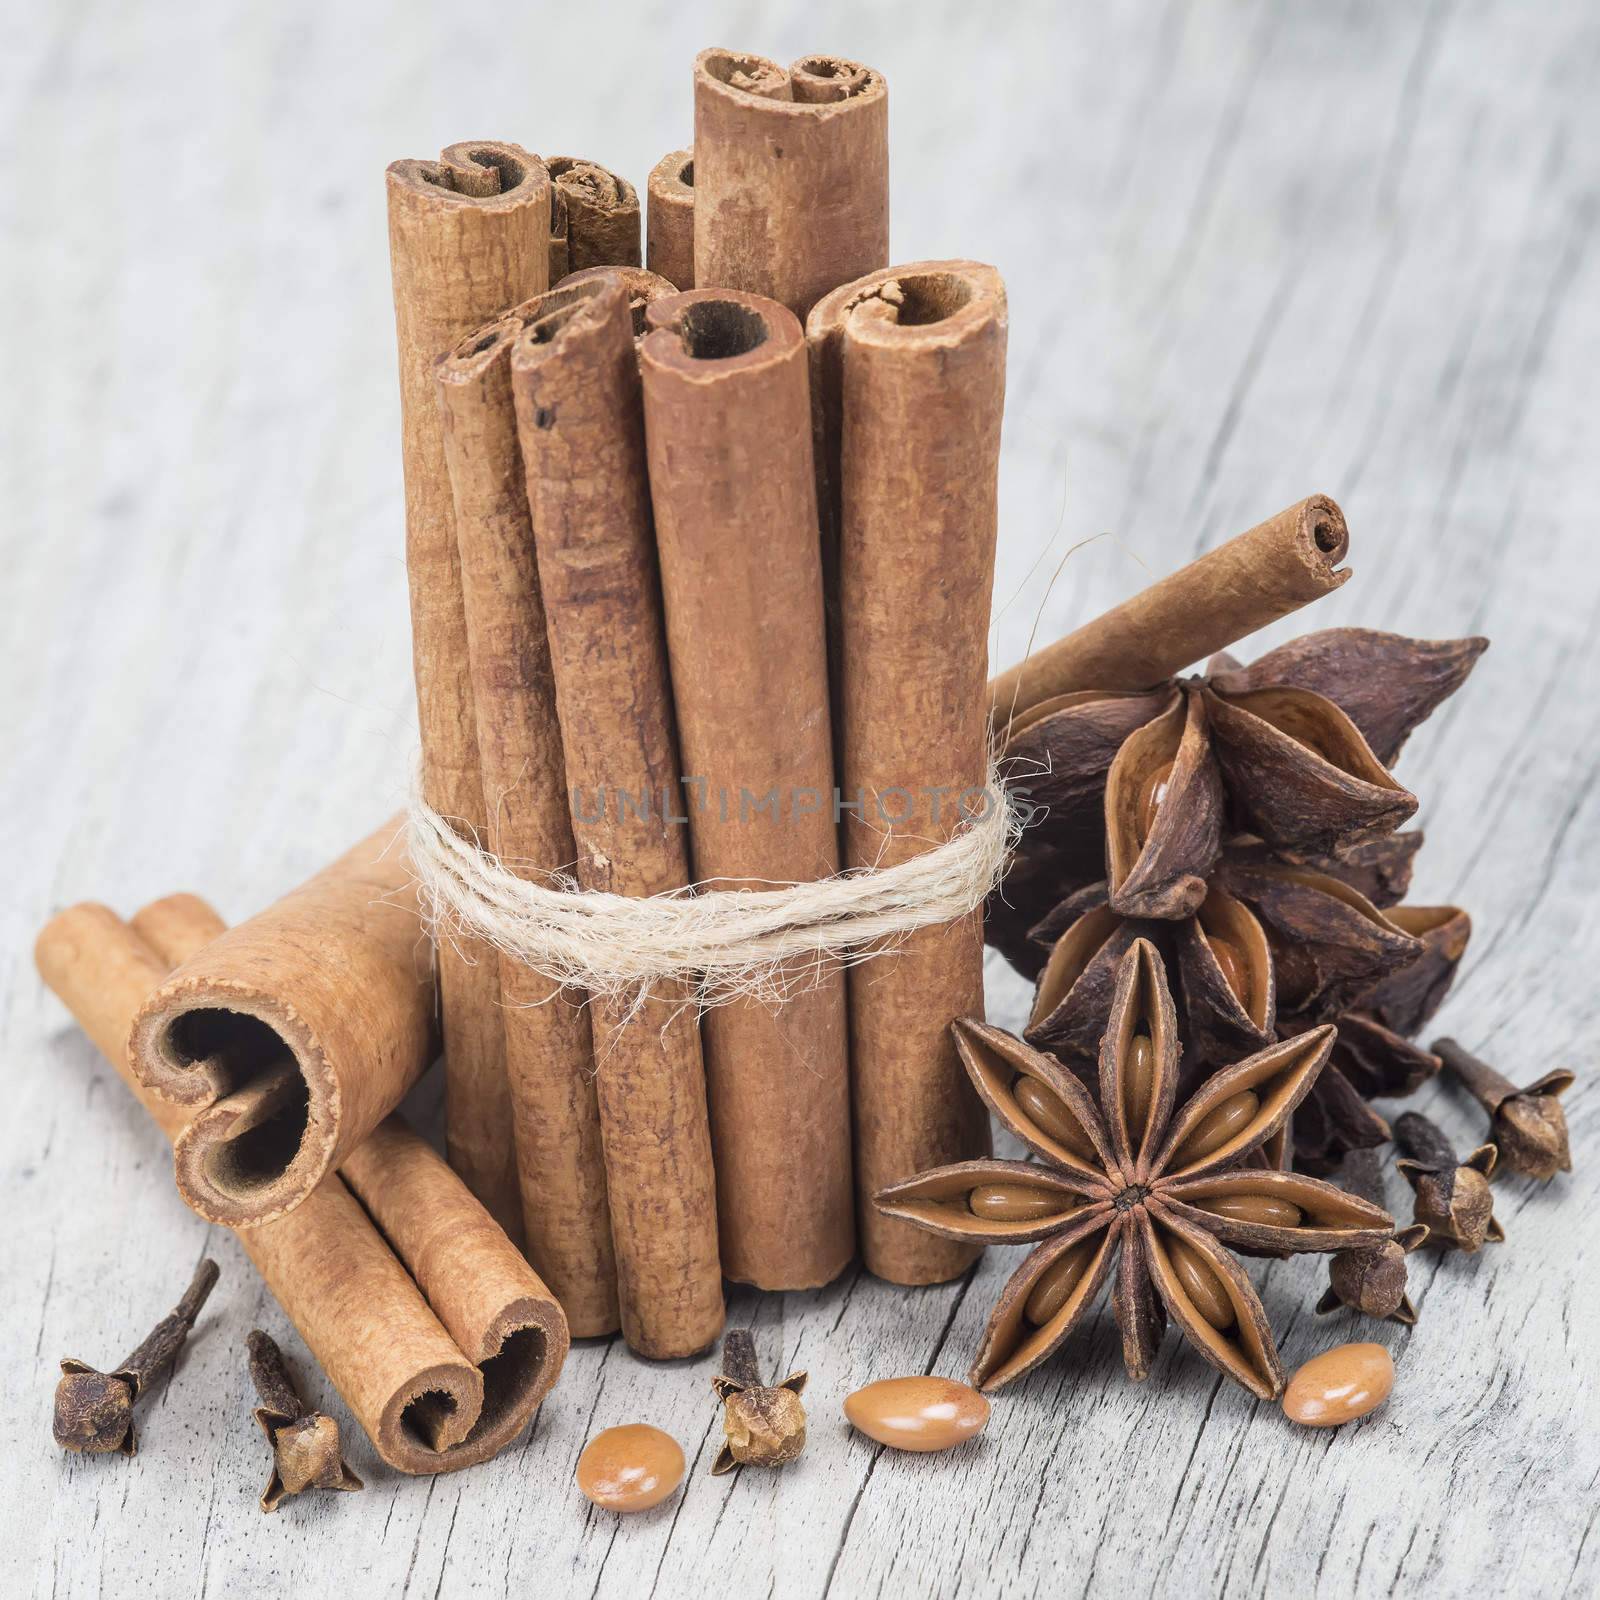 Cinnamon sticks and star anise on a wooden background